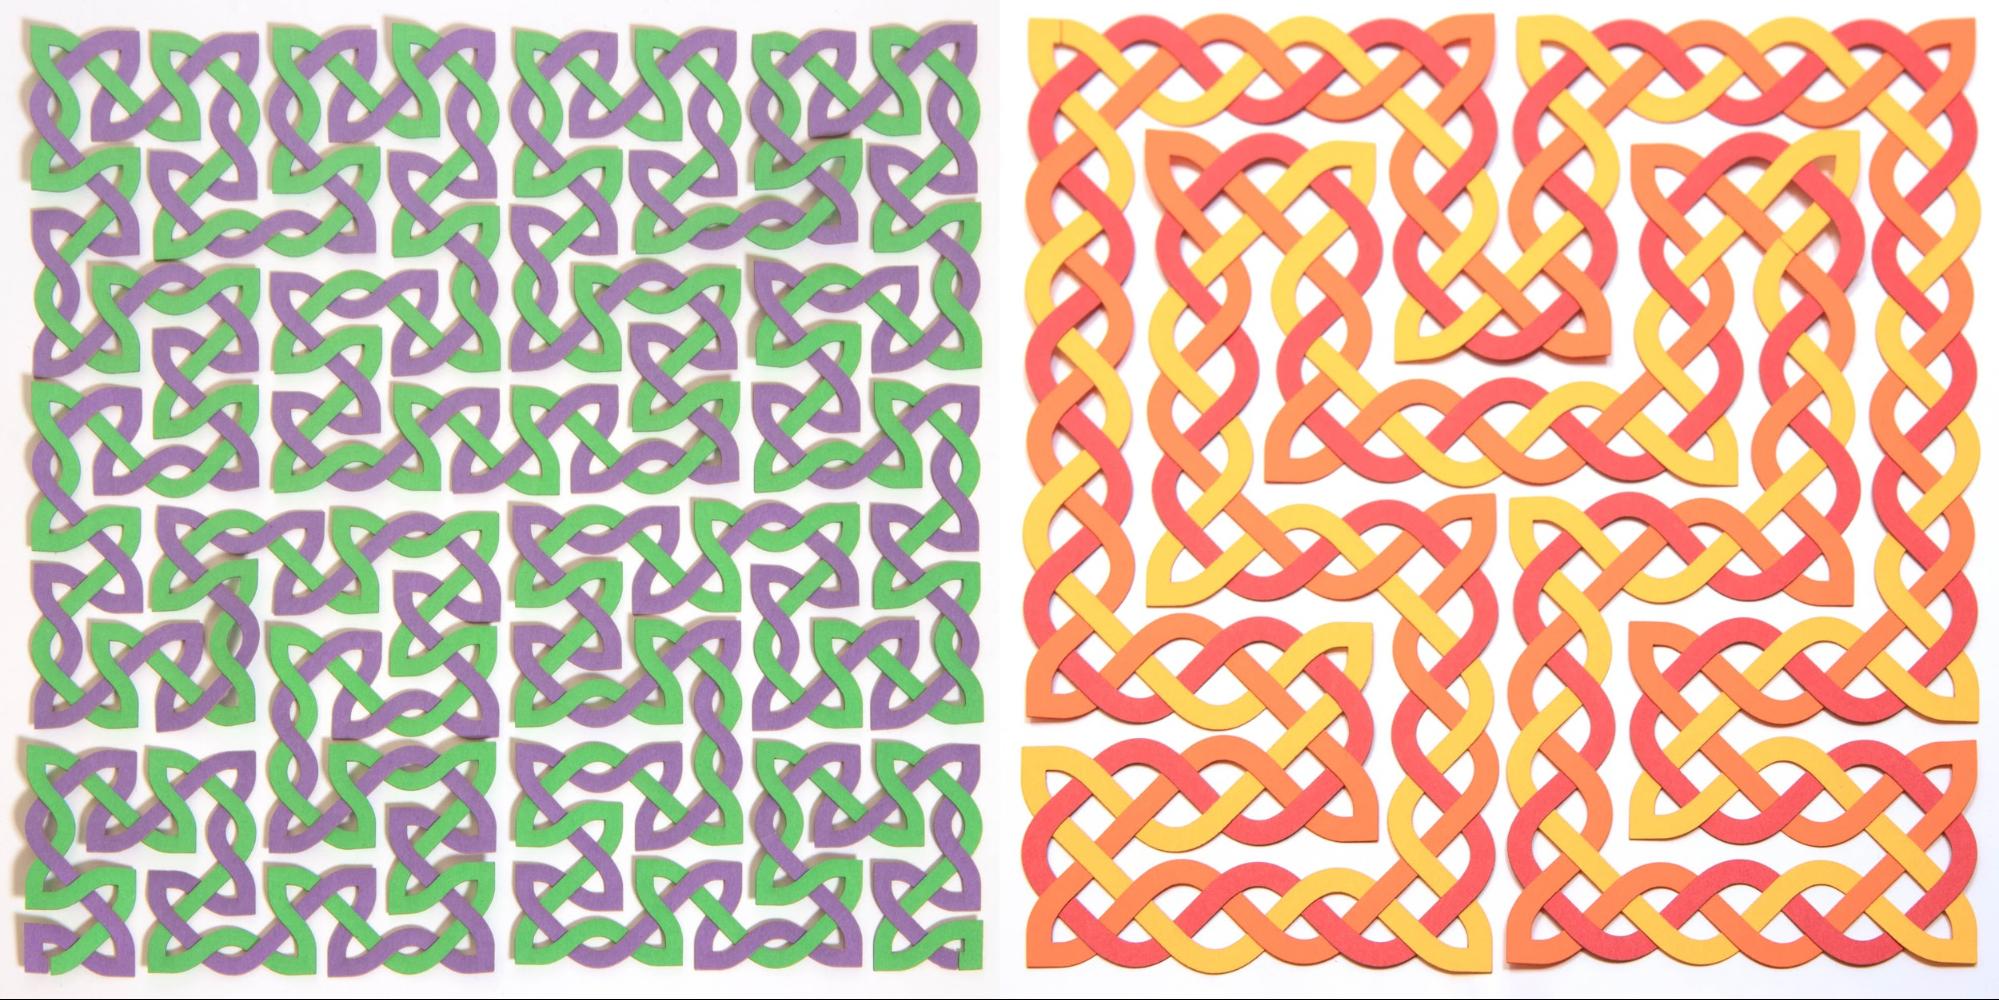 Perspectives On The Hilbert Curve Illustrating Mathematics